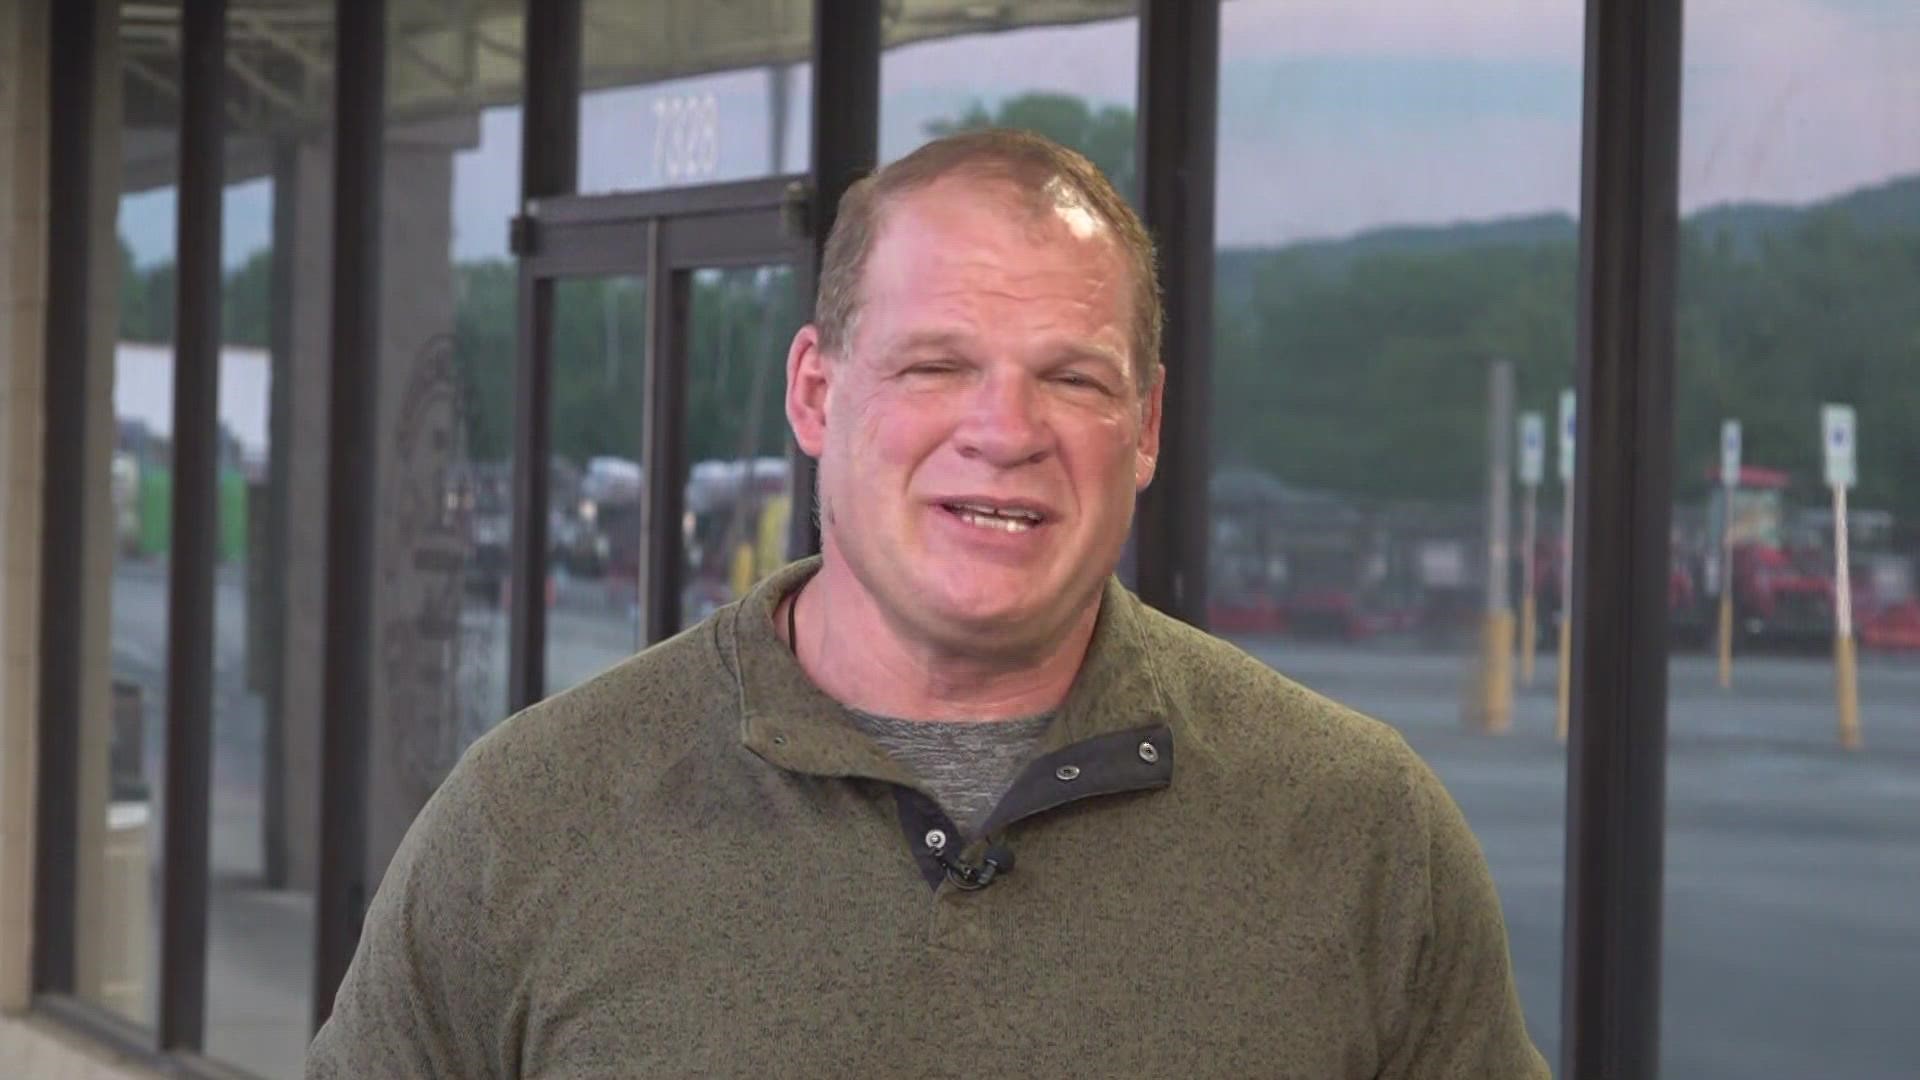 Knox County voters have chosen republican Glenn Jacobs to serve another term as mayor.